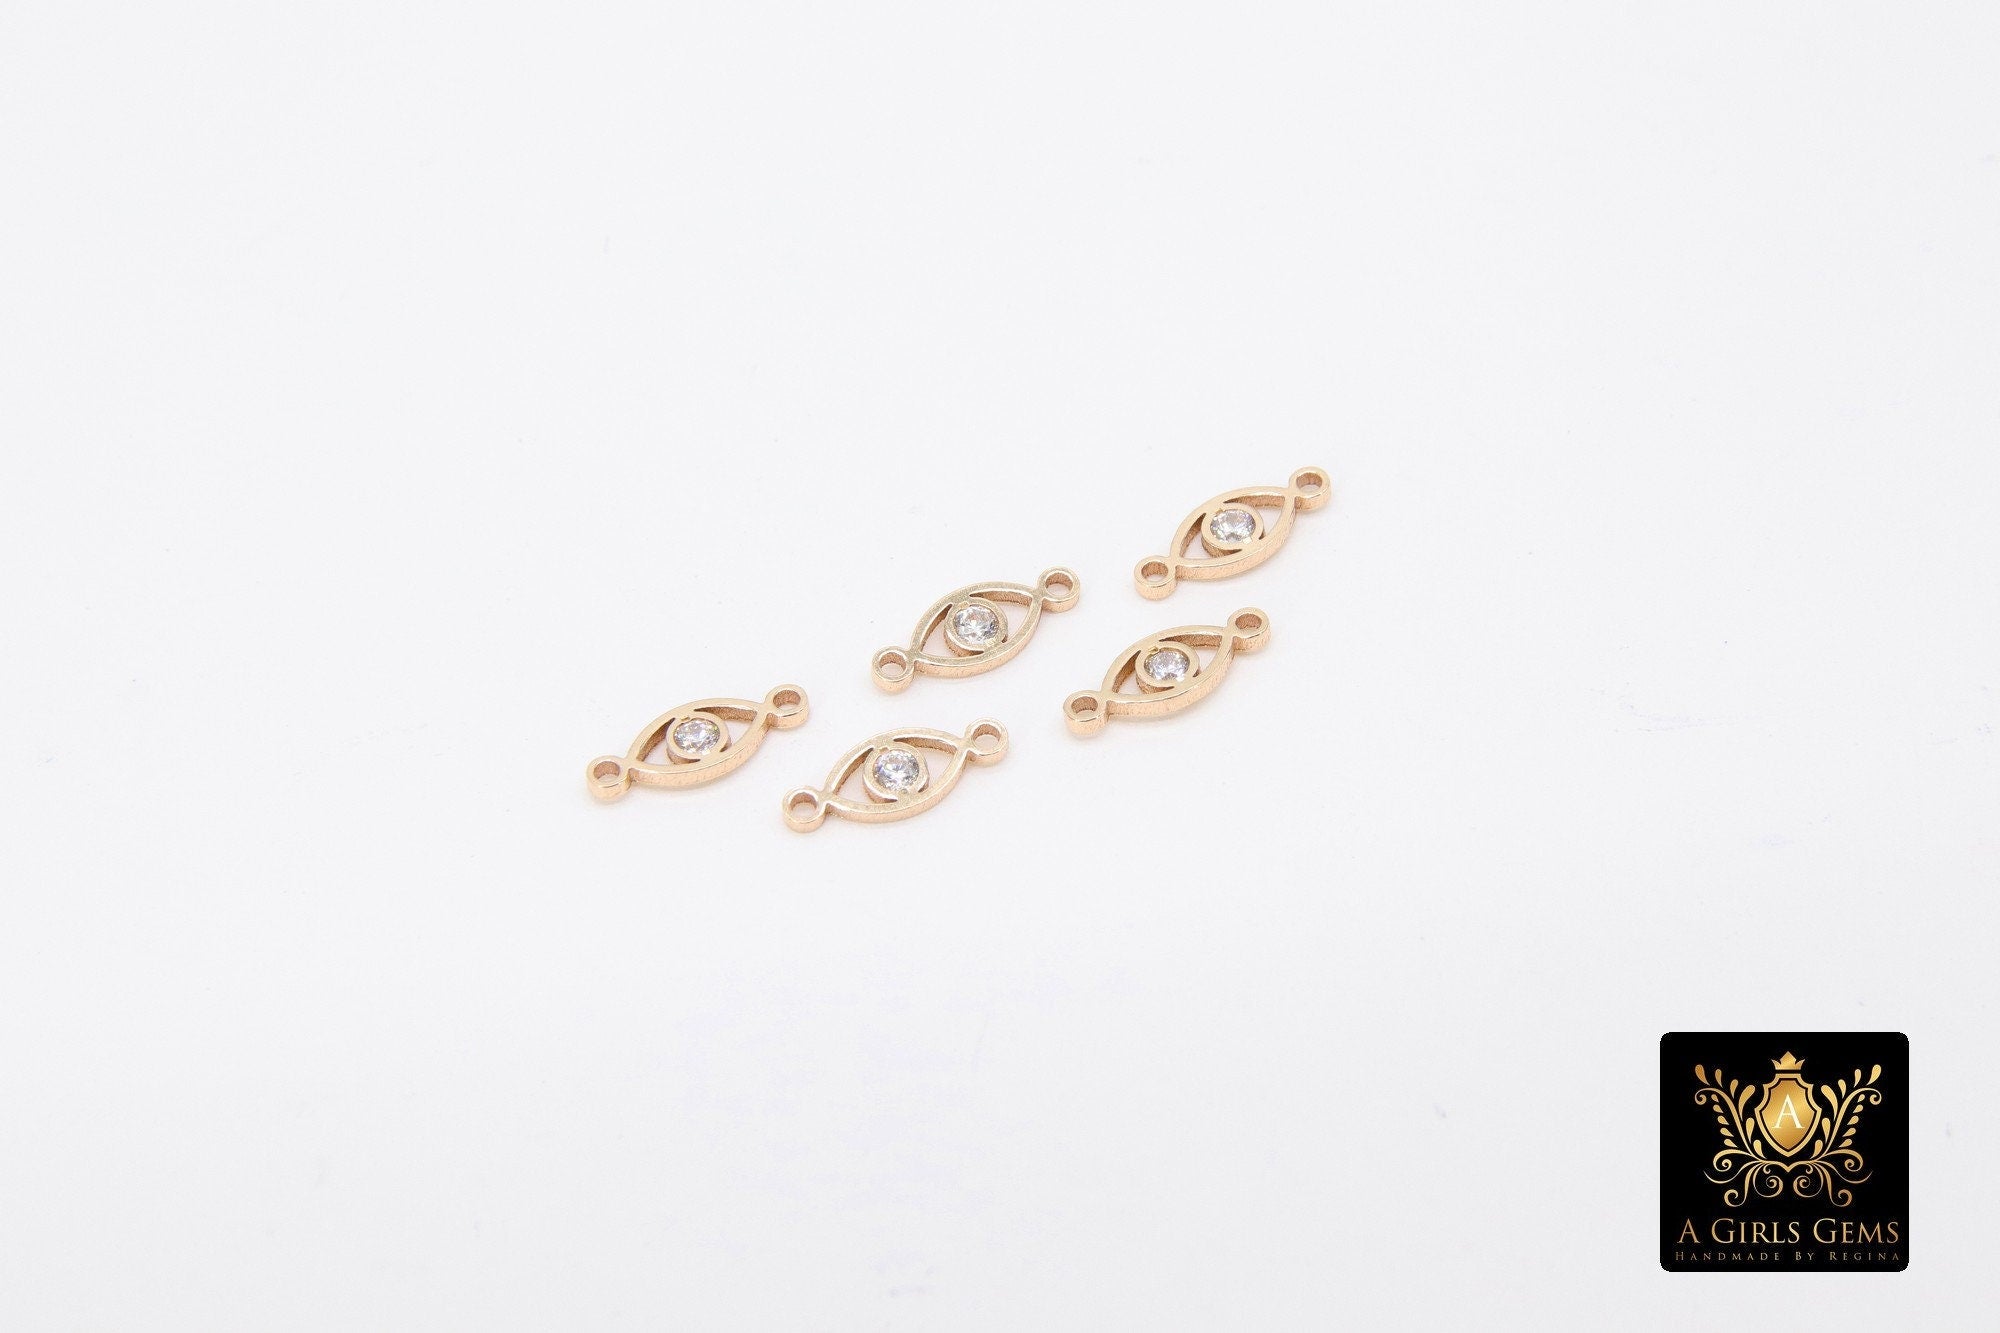 14 K Gold Filled Evil Eye Connector, CZ Micro Pave Evil Eyes Link #3453, Tiny Minimalist Permanent Jewelry, 3 x 9 mm